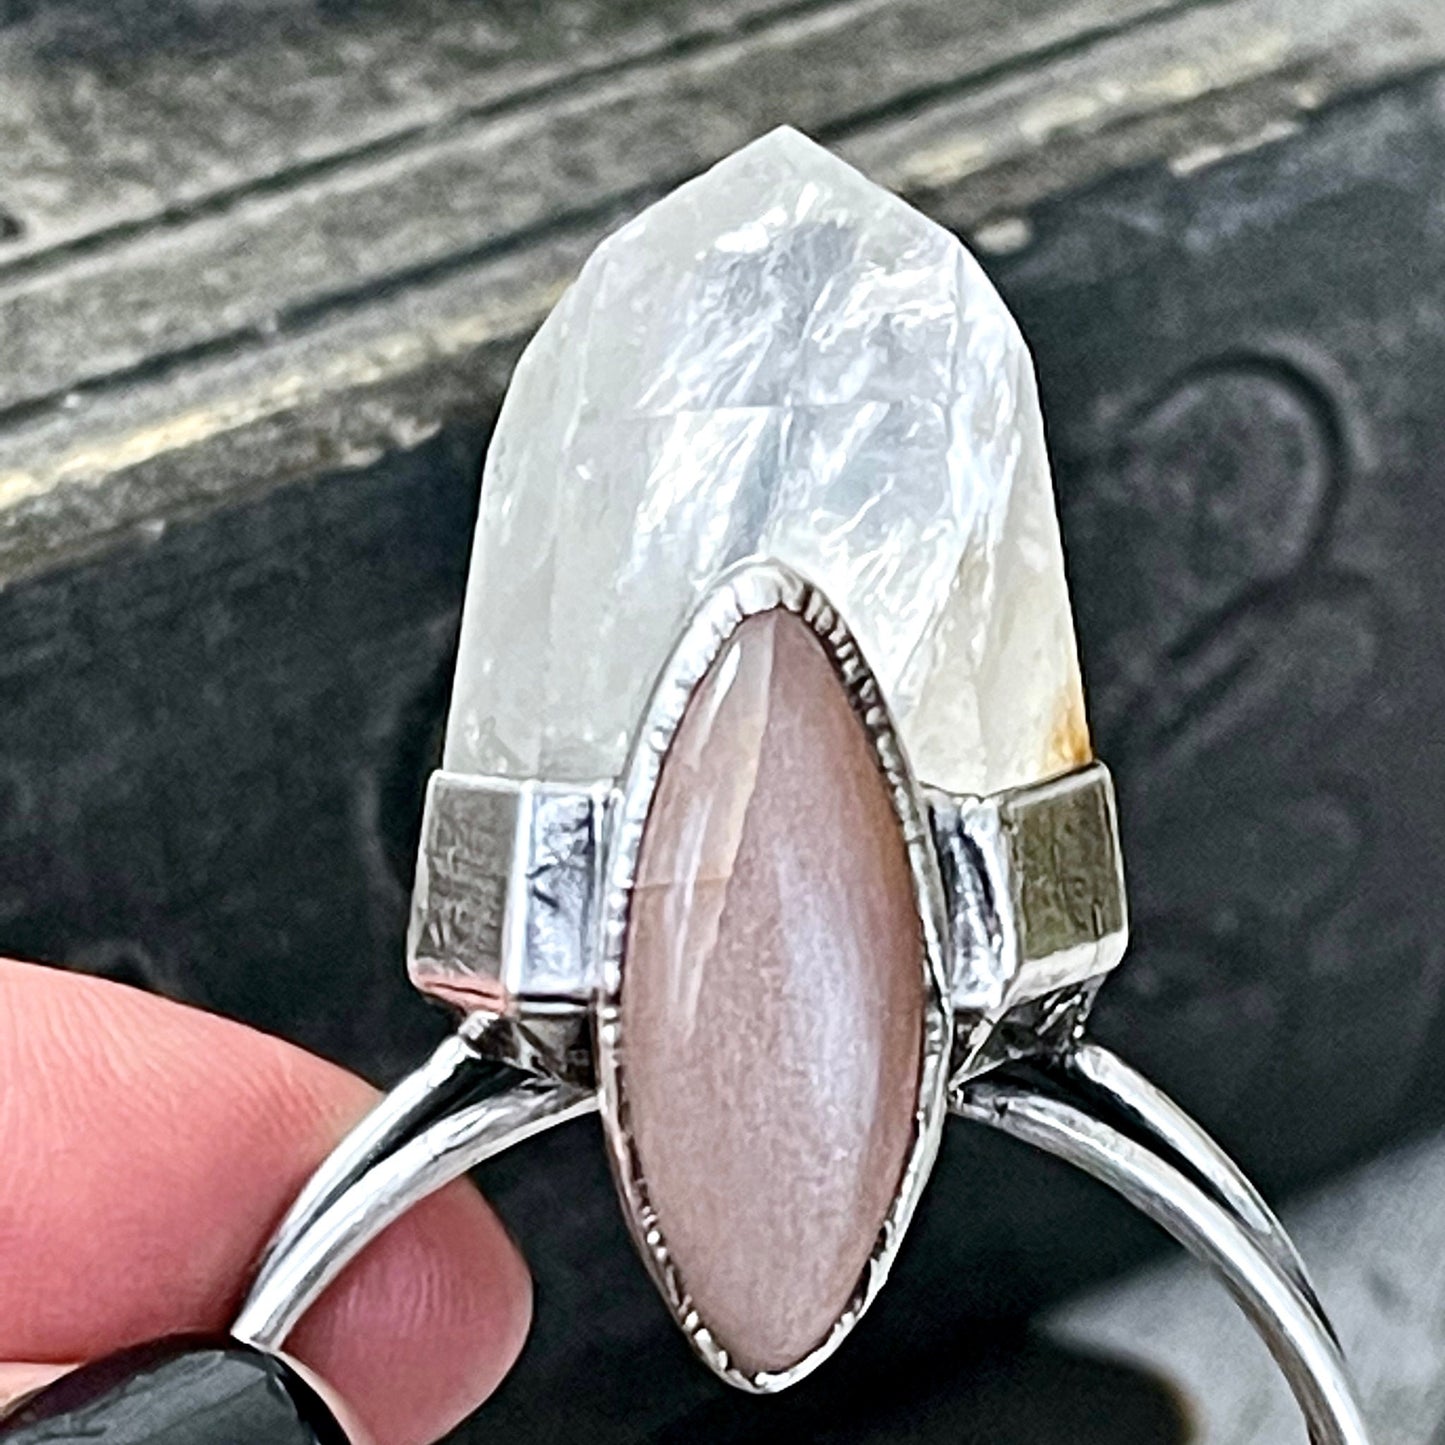 Clear Quartz & Peach Moonstone Crystal Statement Necklace in Fine Silver / Foxlark Collection - One of a Kind